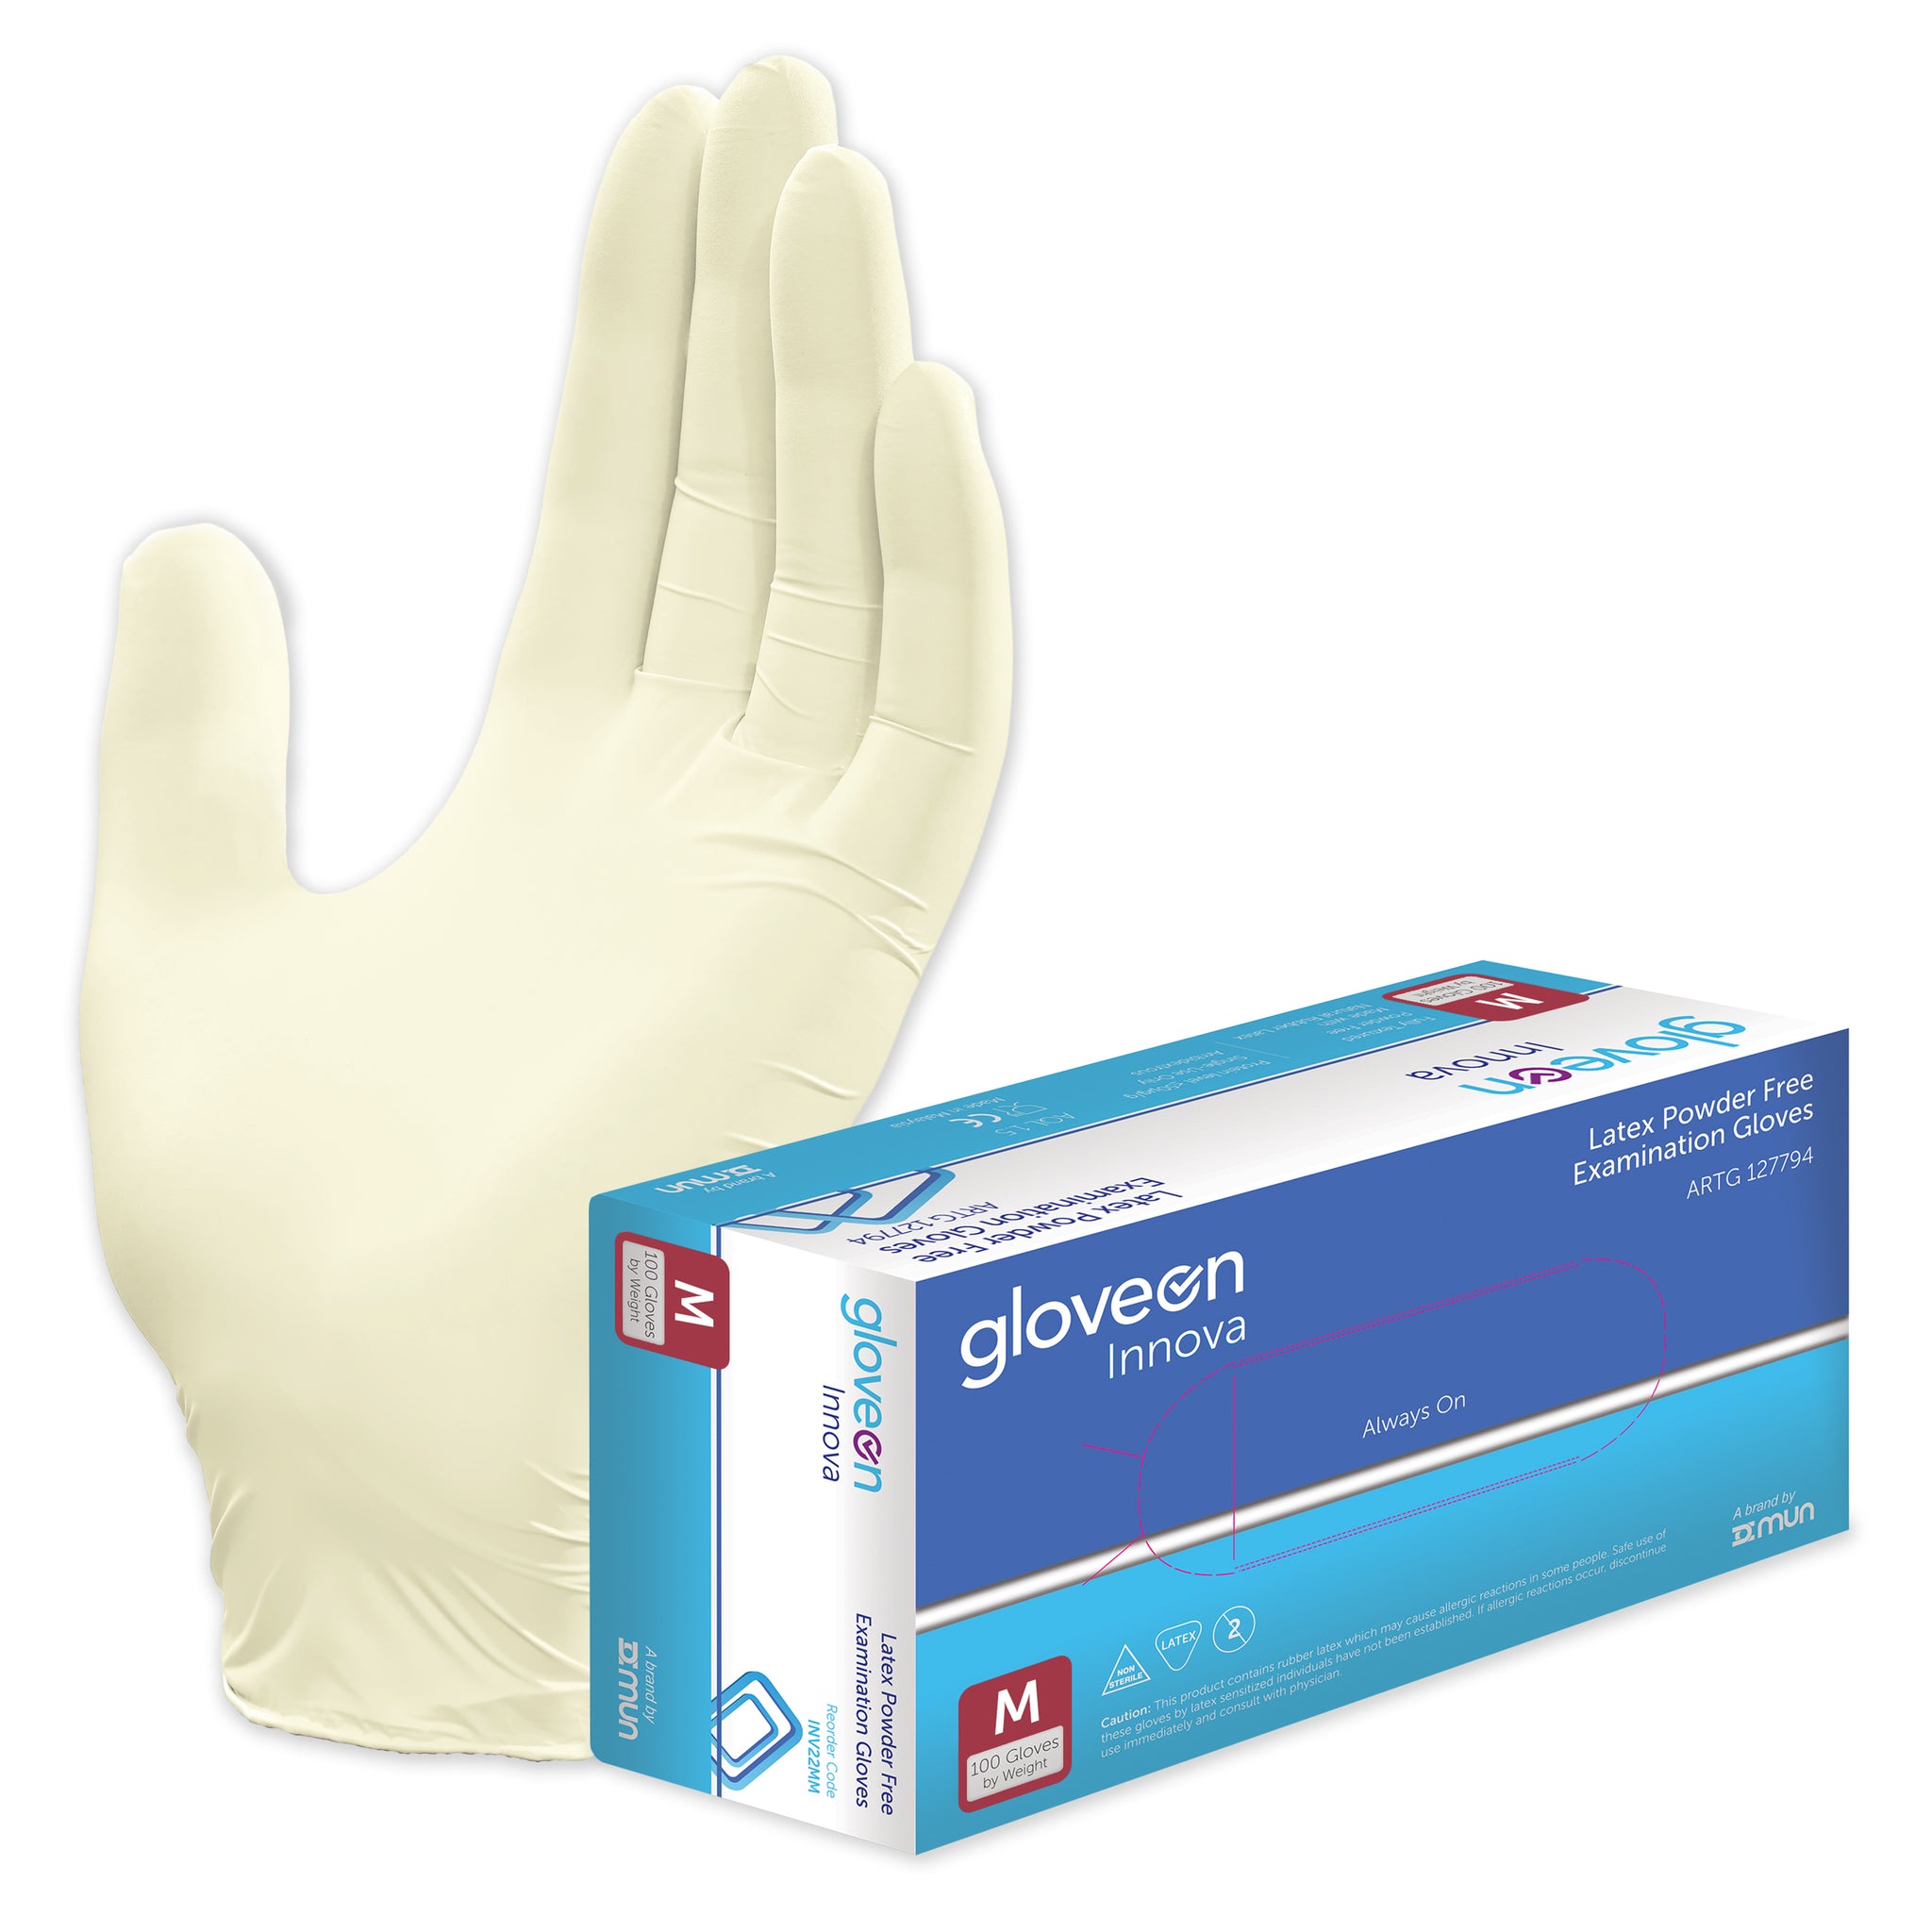 Exam Gloves, Powder Free, Non-Sterile, Fully Textured, Standard Cuff, Natural Colour - Box of 100, M